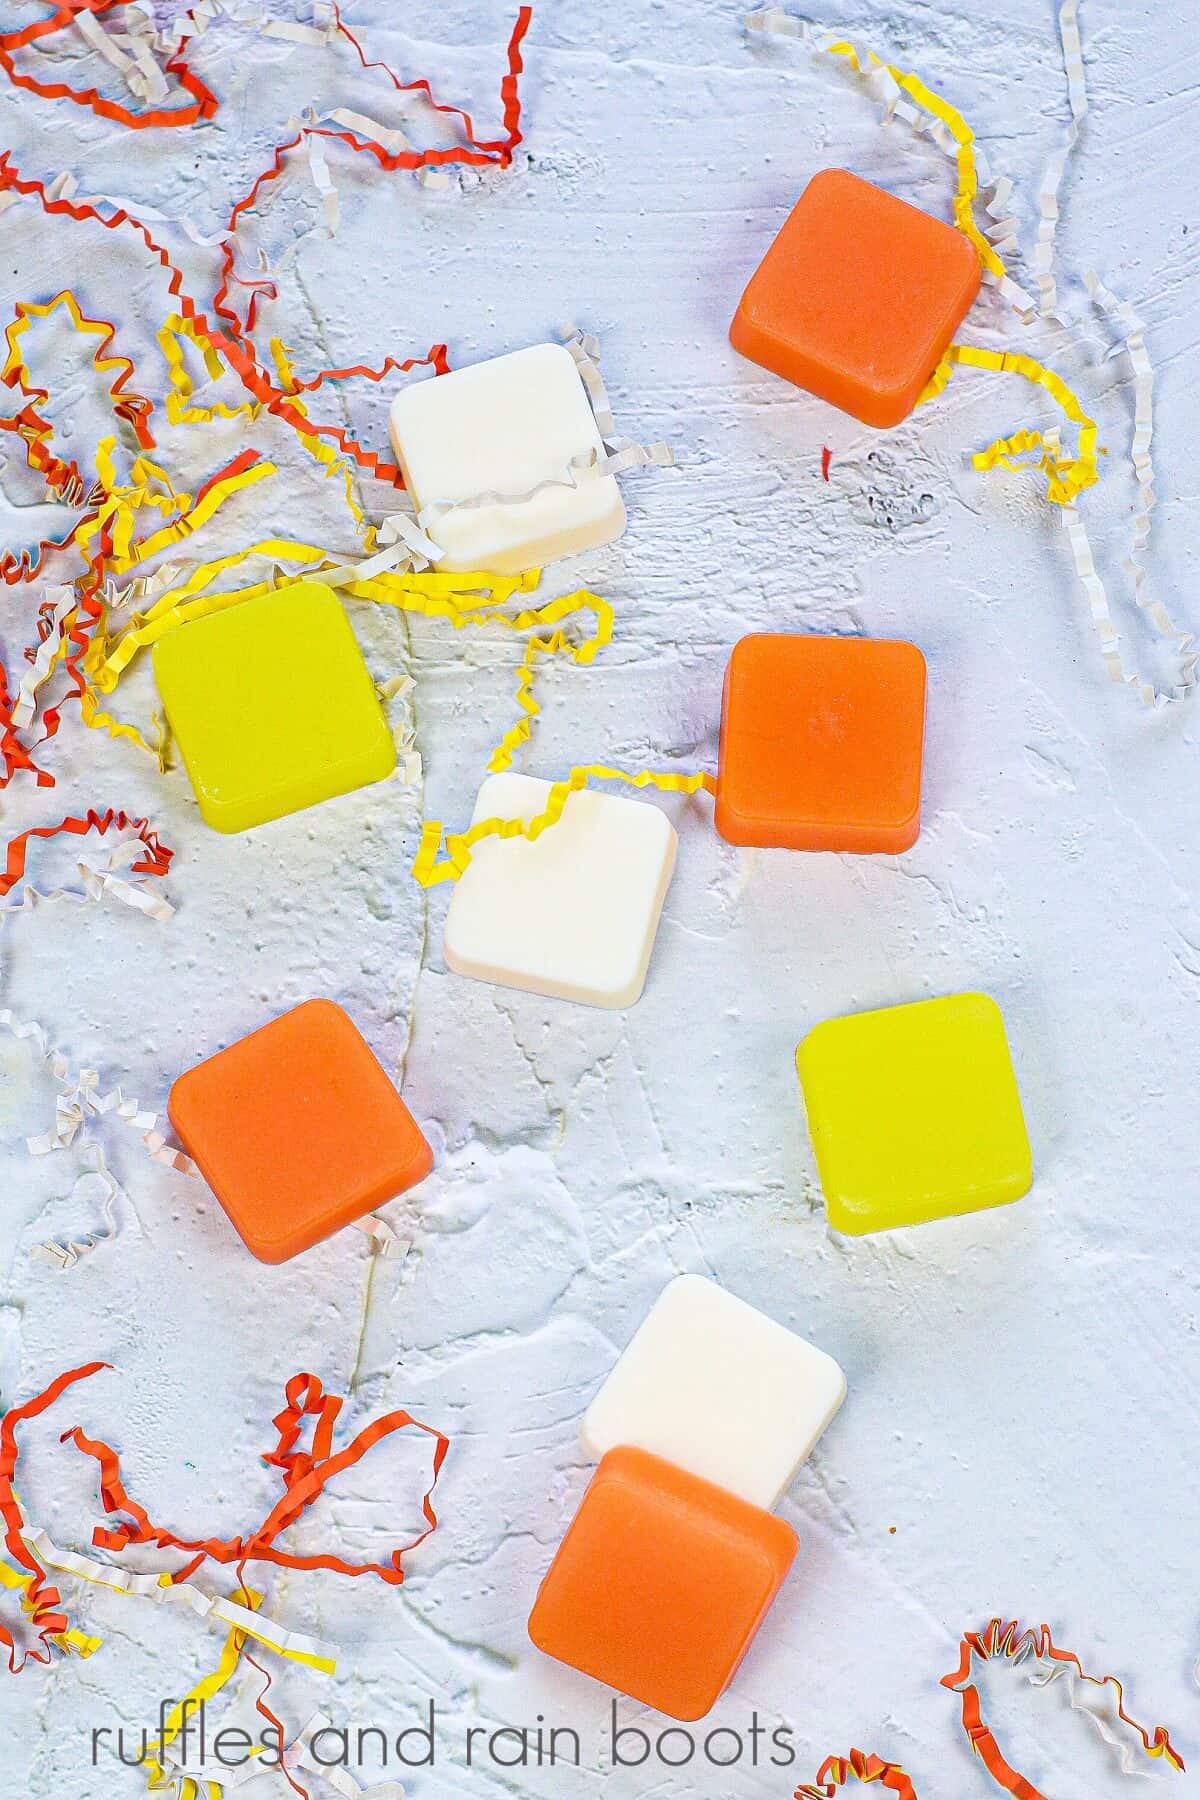 Several Candy Corn Sugar Scrub Cubes next to candy corn colored shredded paper against a white concrete background.